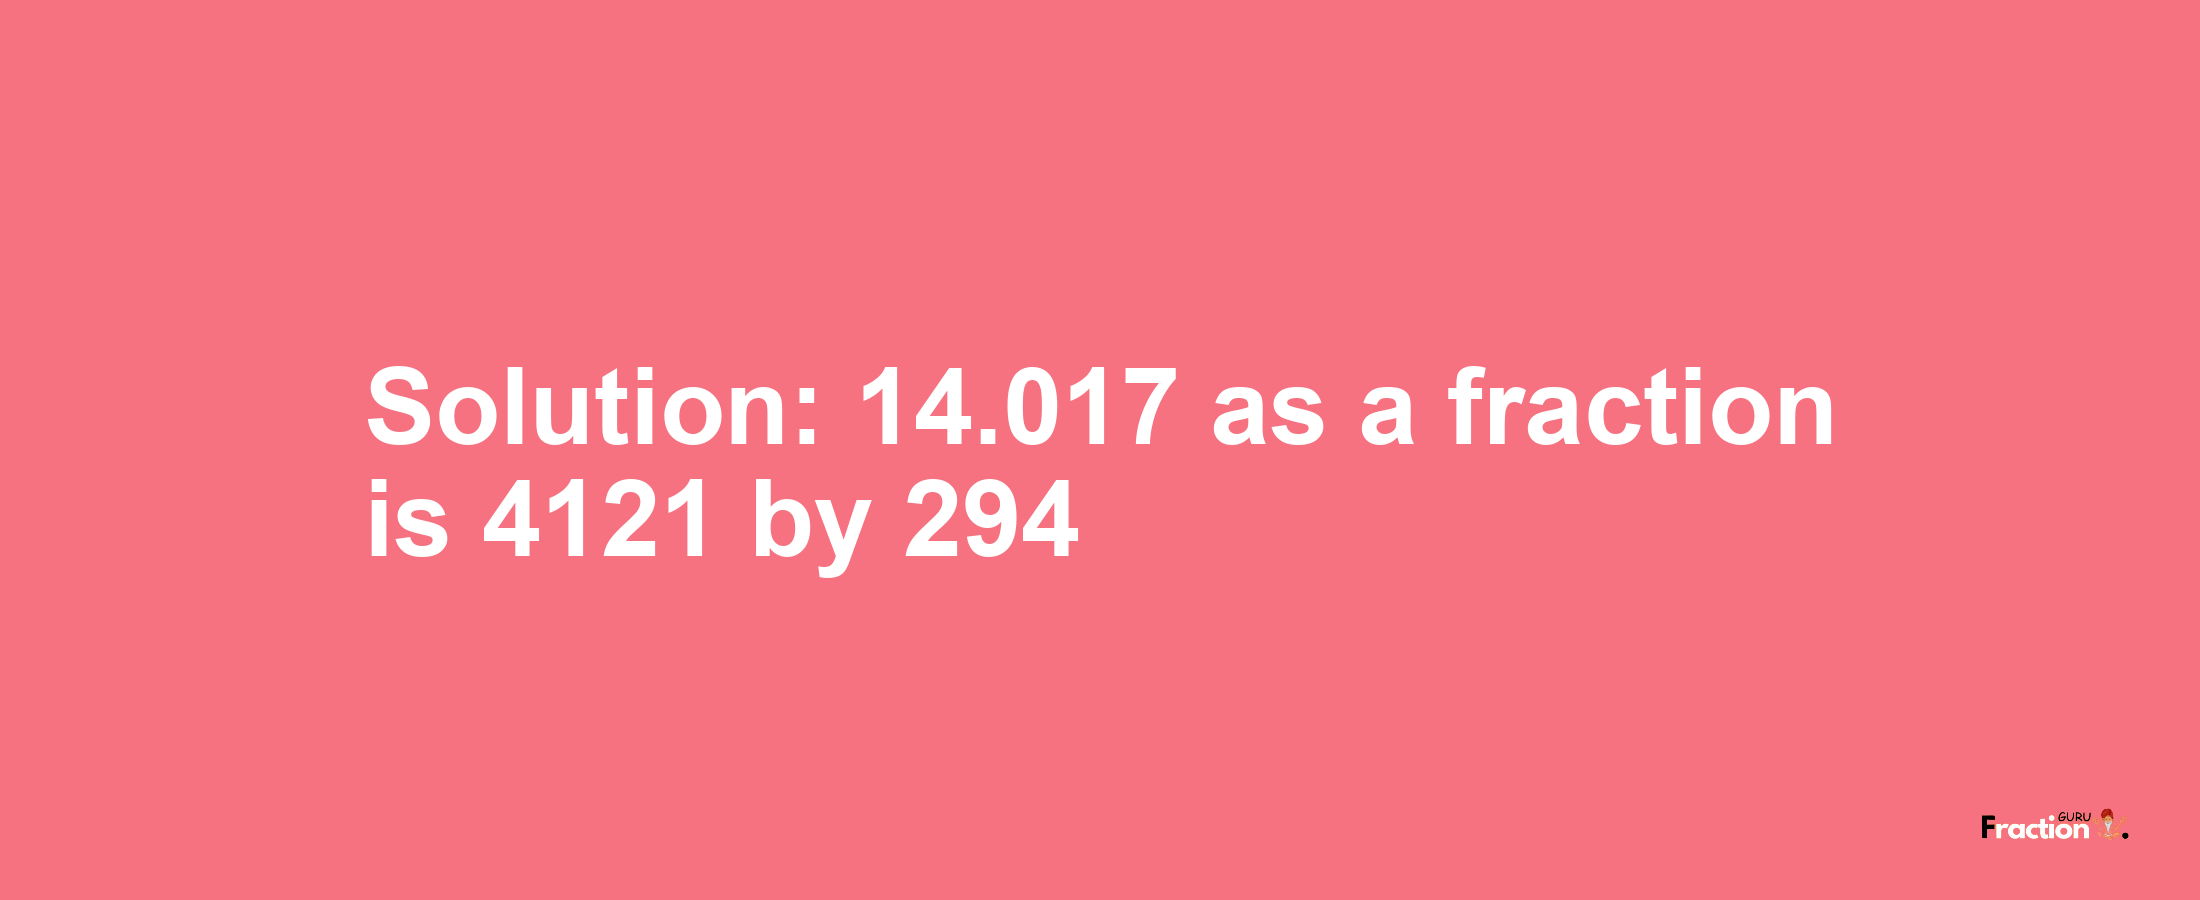 Solution:14.017 as a fraction is 4121/294